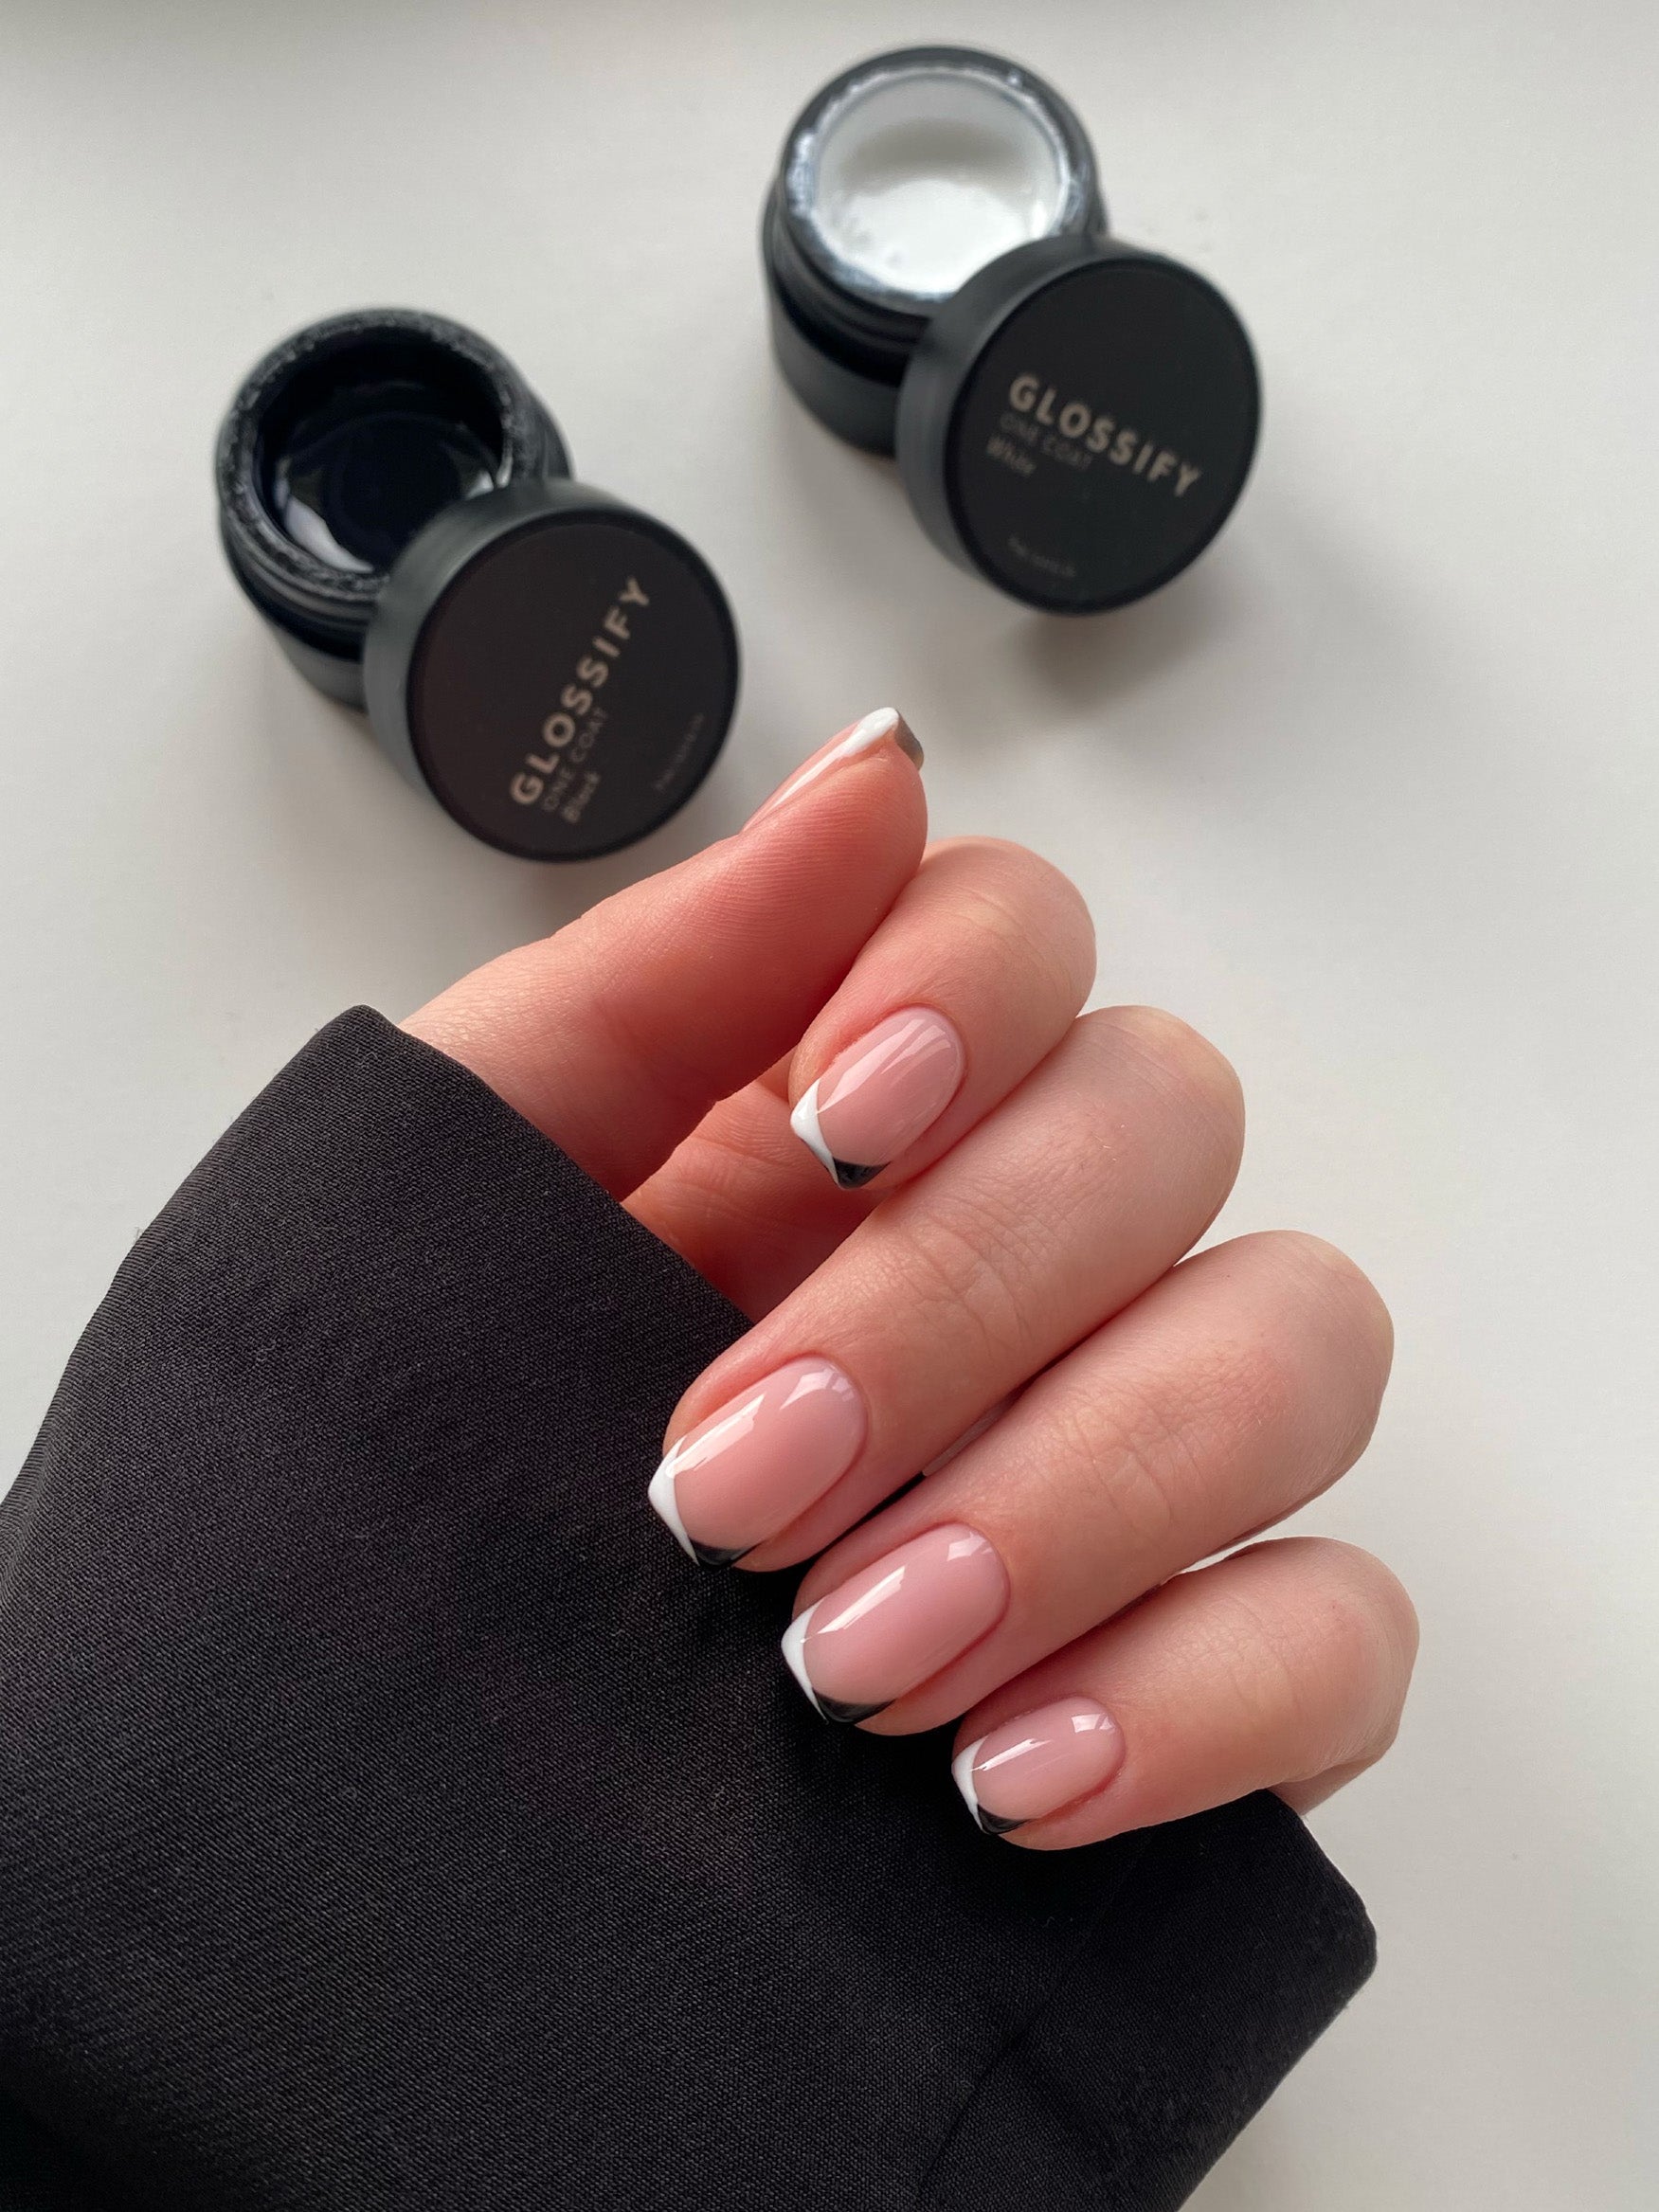 ACHIEVING THE PERFECT MONOCHROME FRENCH TIP